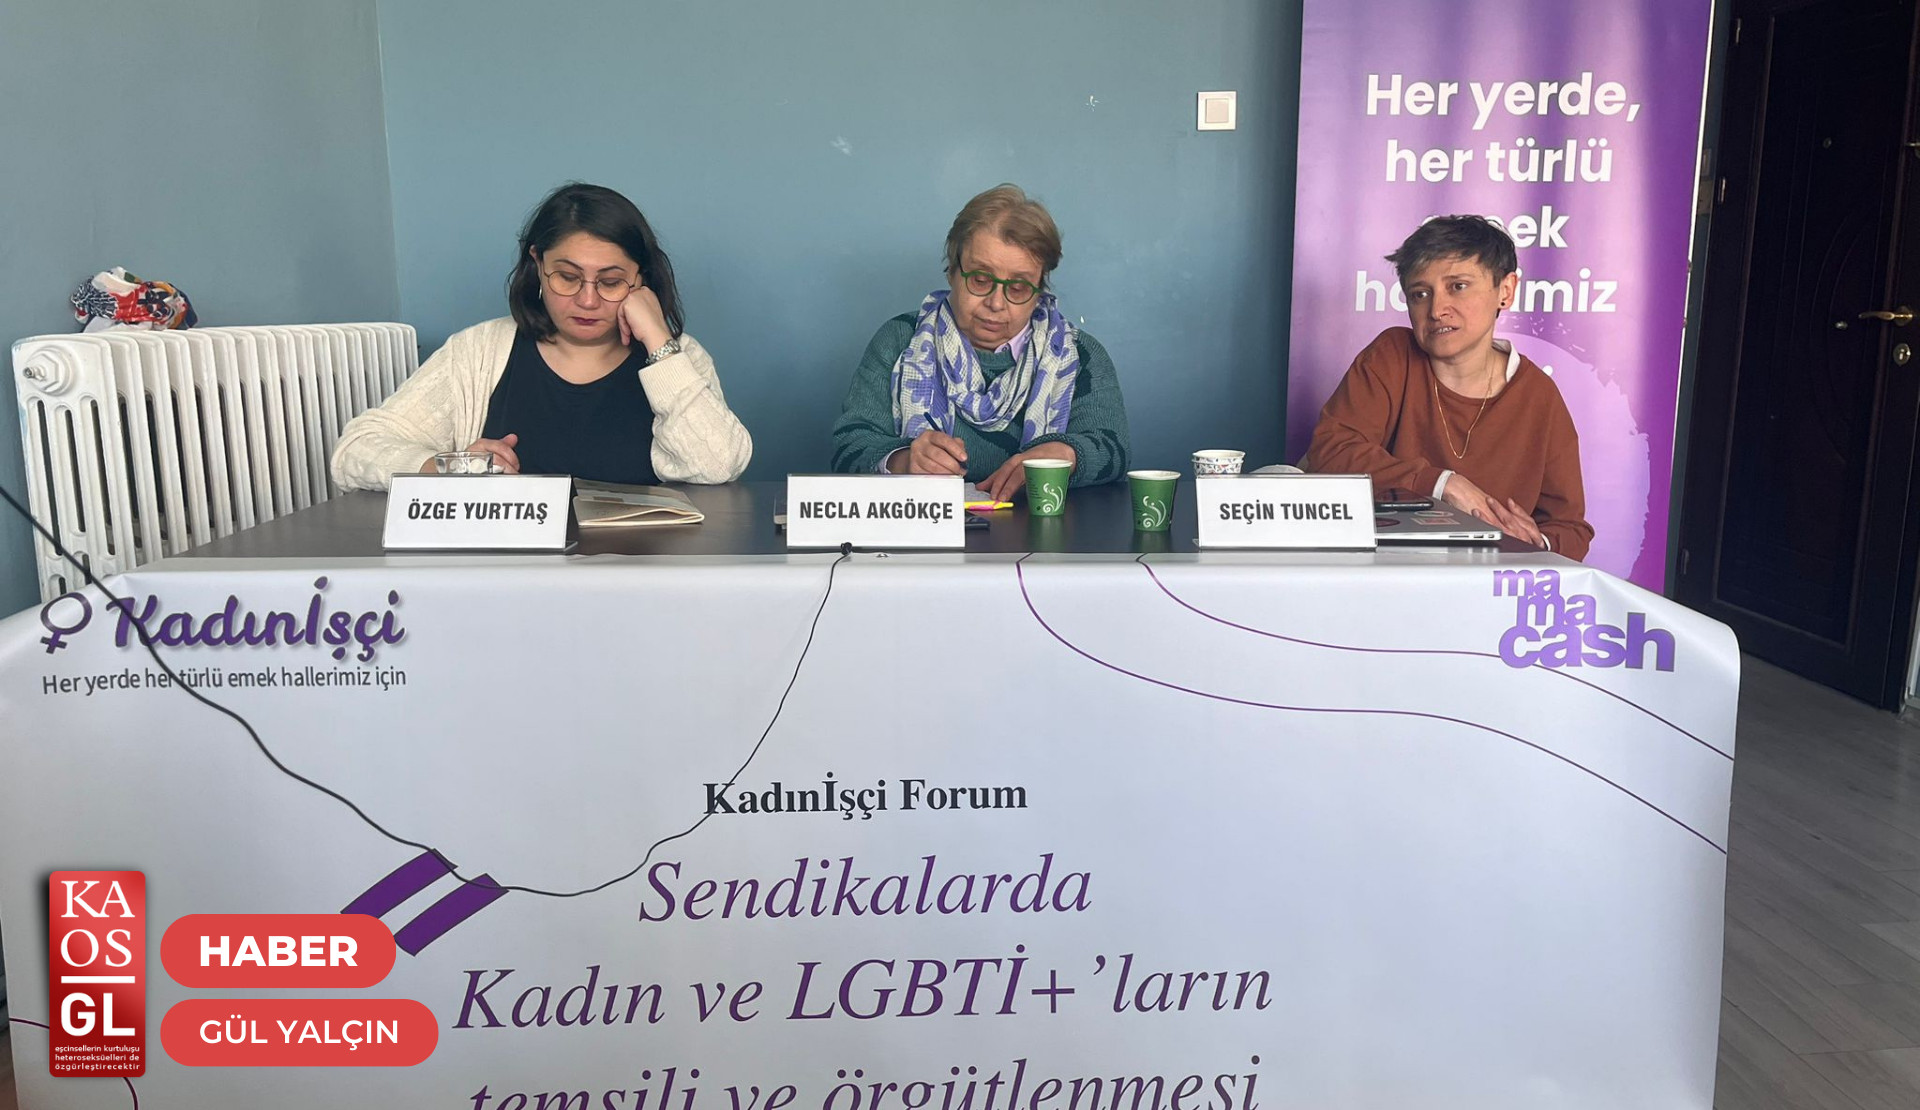 “Forum on Representation and Organization of Women and LGBTI+ in Trade Unions” was held | Kaos GL - News Portal for LGBTI+ News